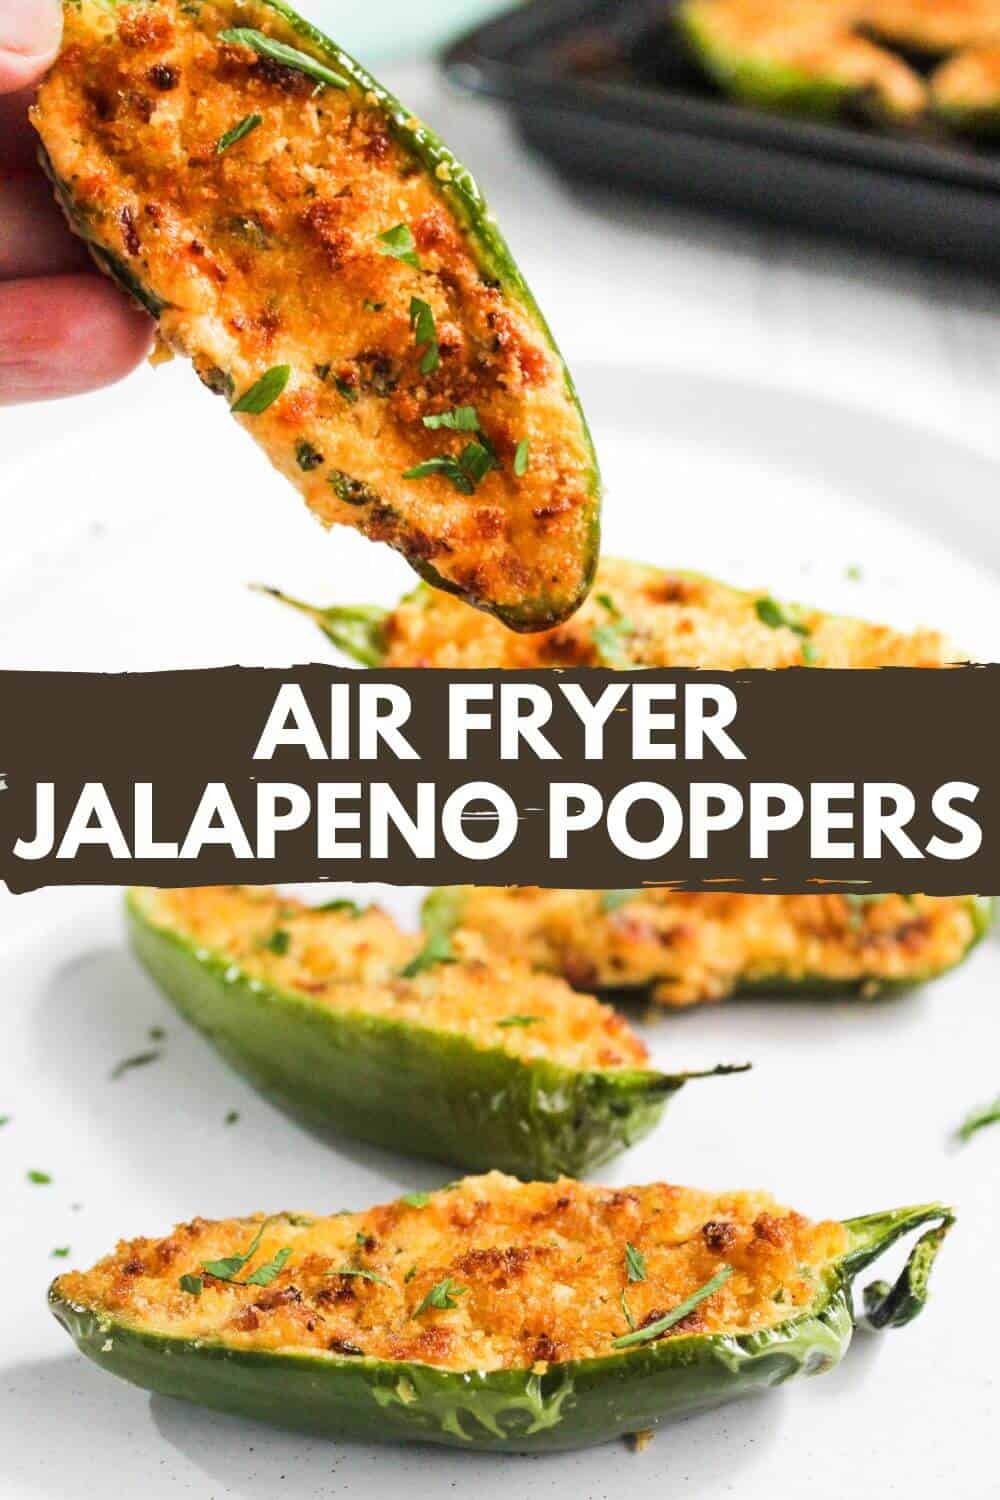 Air fryer jalapeño poppers with recipe title text.